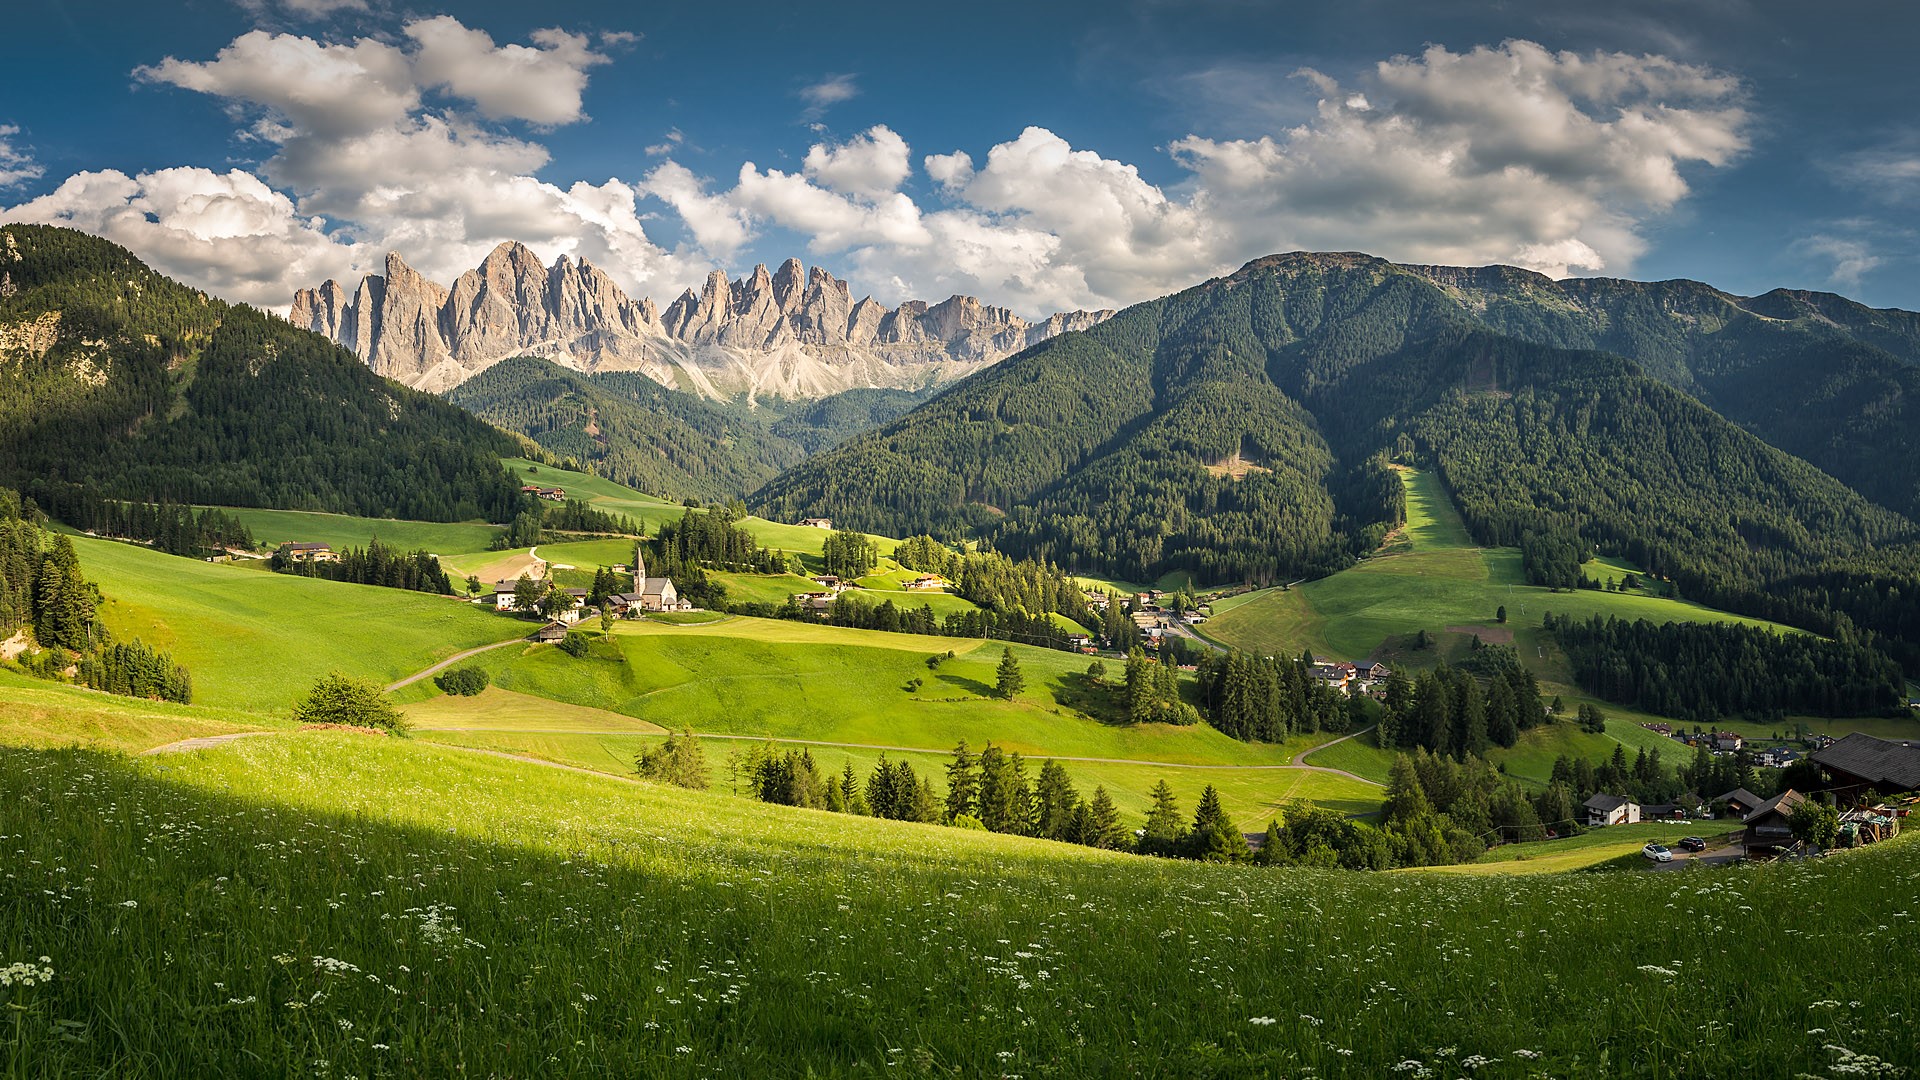 General 1920x1080 nature landscape mountains clouds trees forest village path flowers sky Dolomites Italy Val di Funes house idyllic